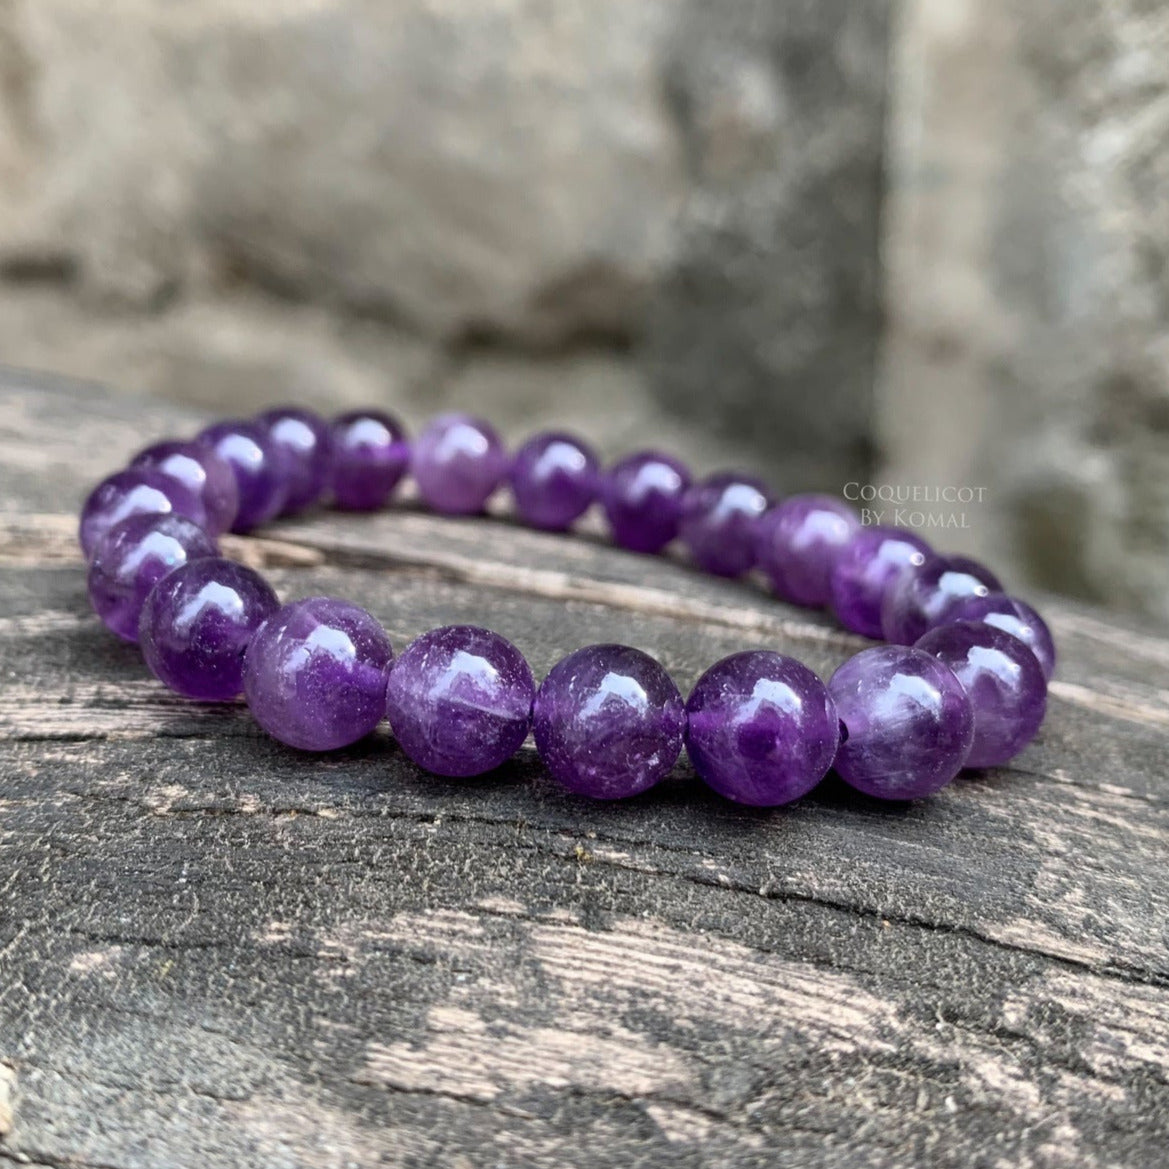 Amethyst Bracelet 8mm Size Stone for Men or Women - China Gift for Women  and Bracelet Jewelry price | Made-in-China.com